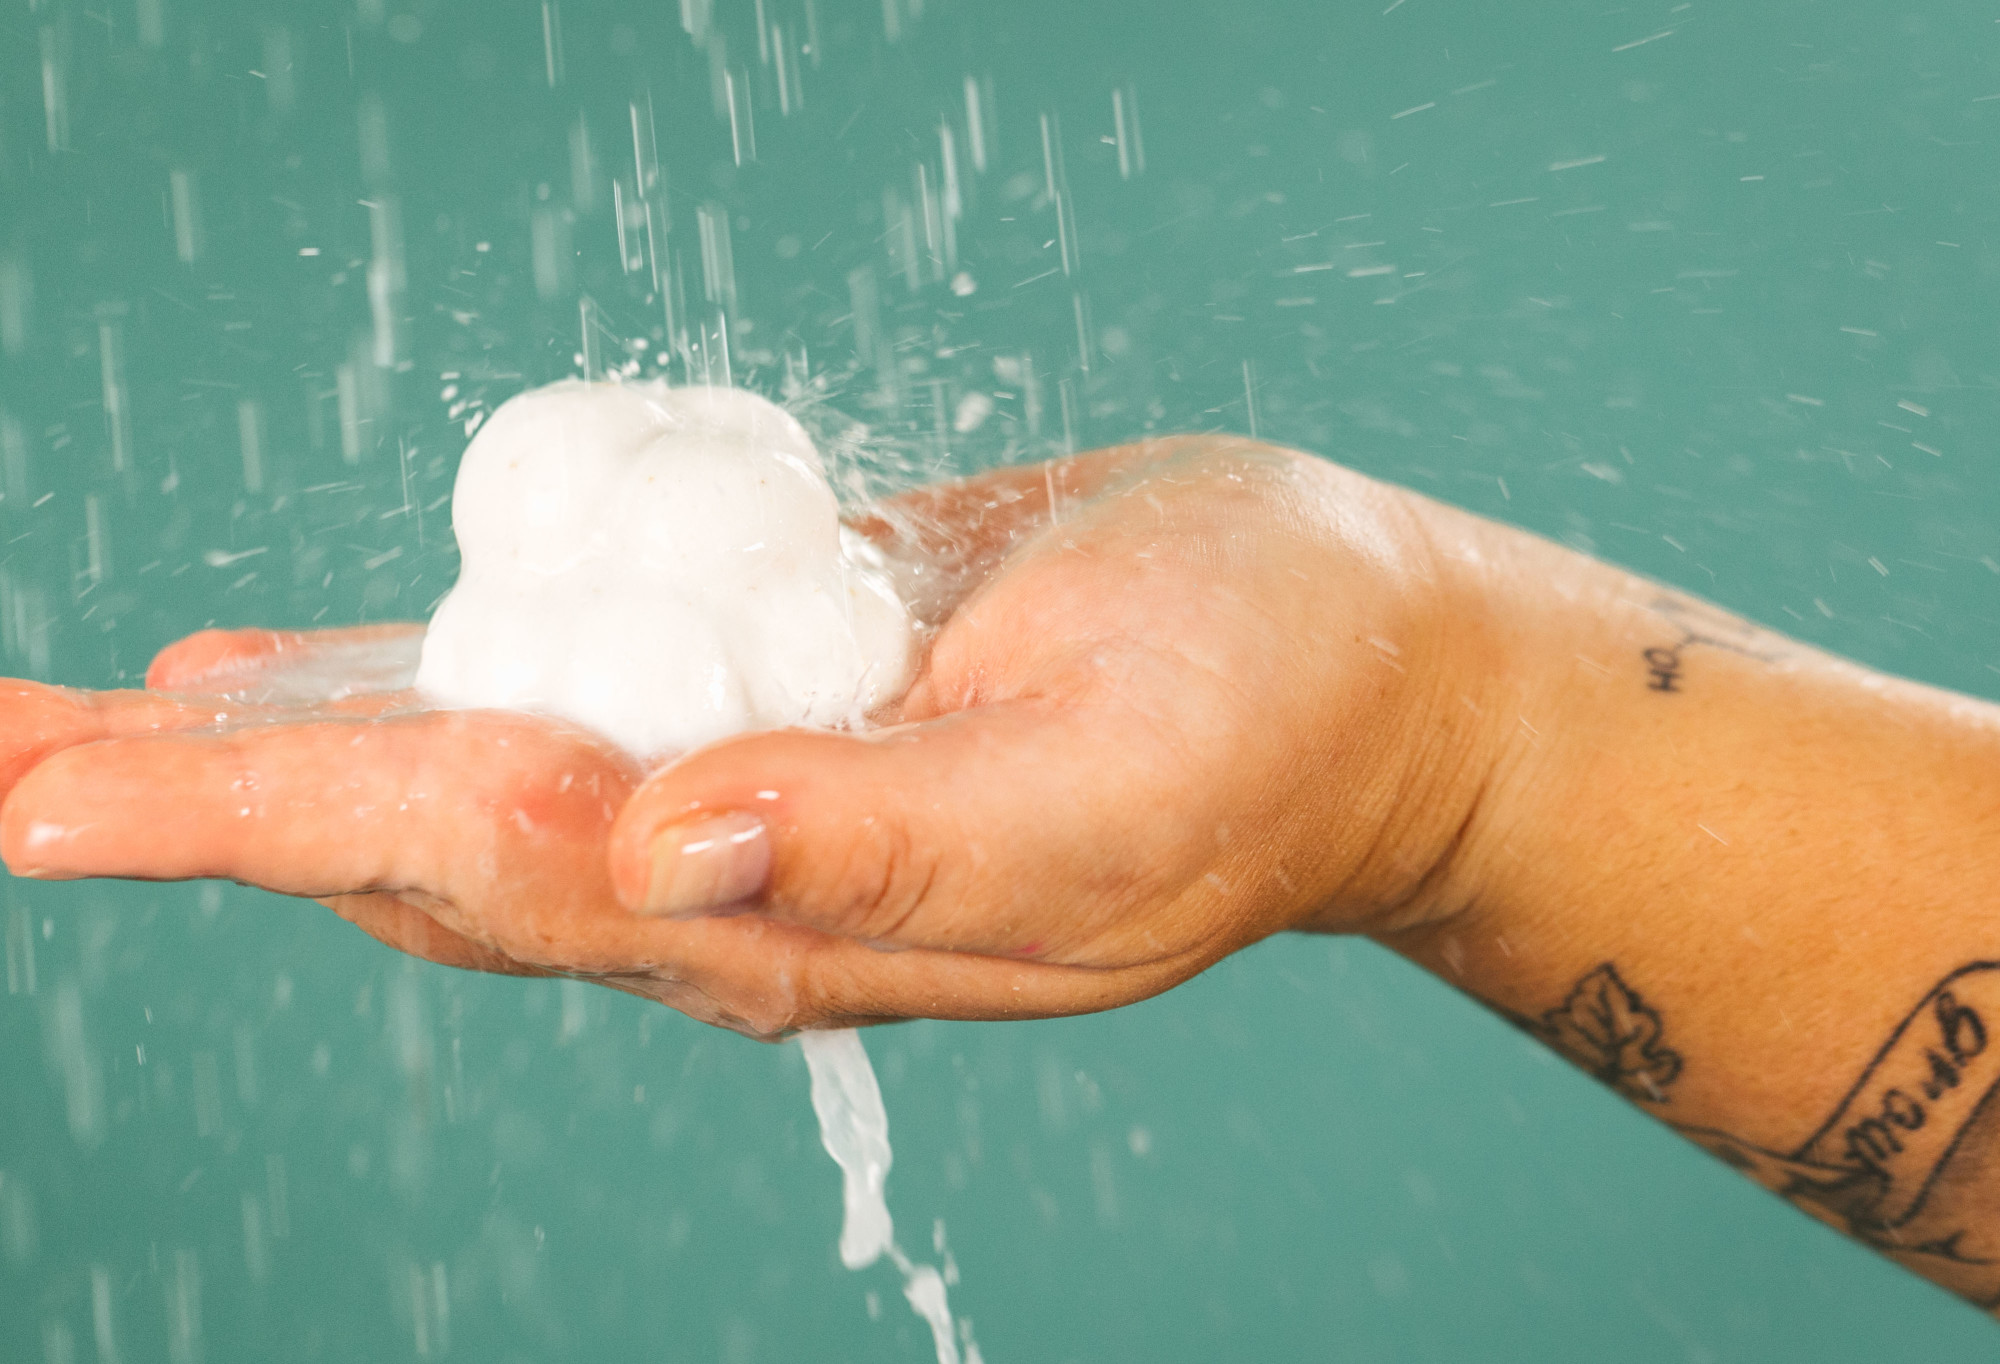 Sleepy, a white, bobbly, cloud shaped shower bomb, is held in the palm of the hand, under water pouring down like rain.